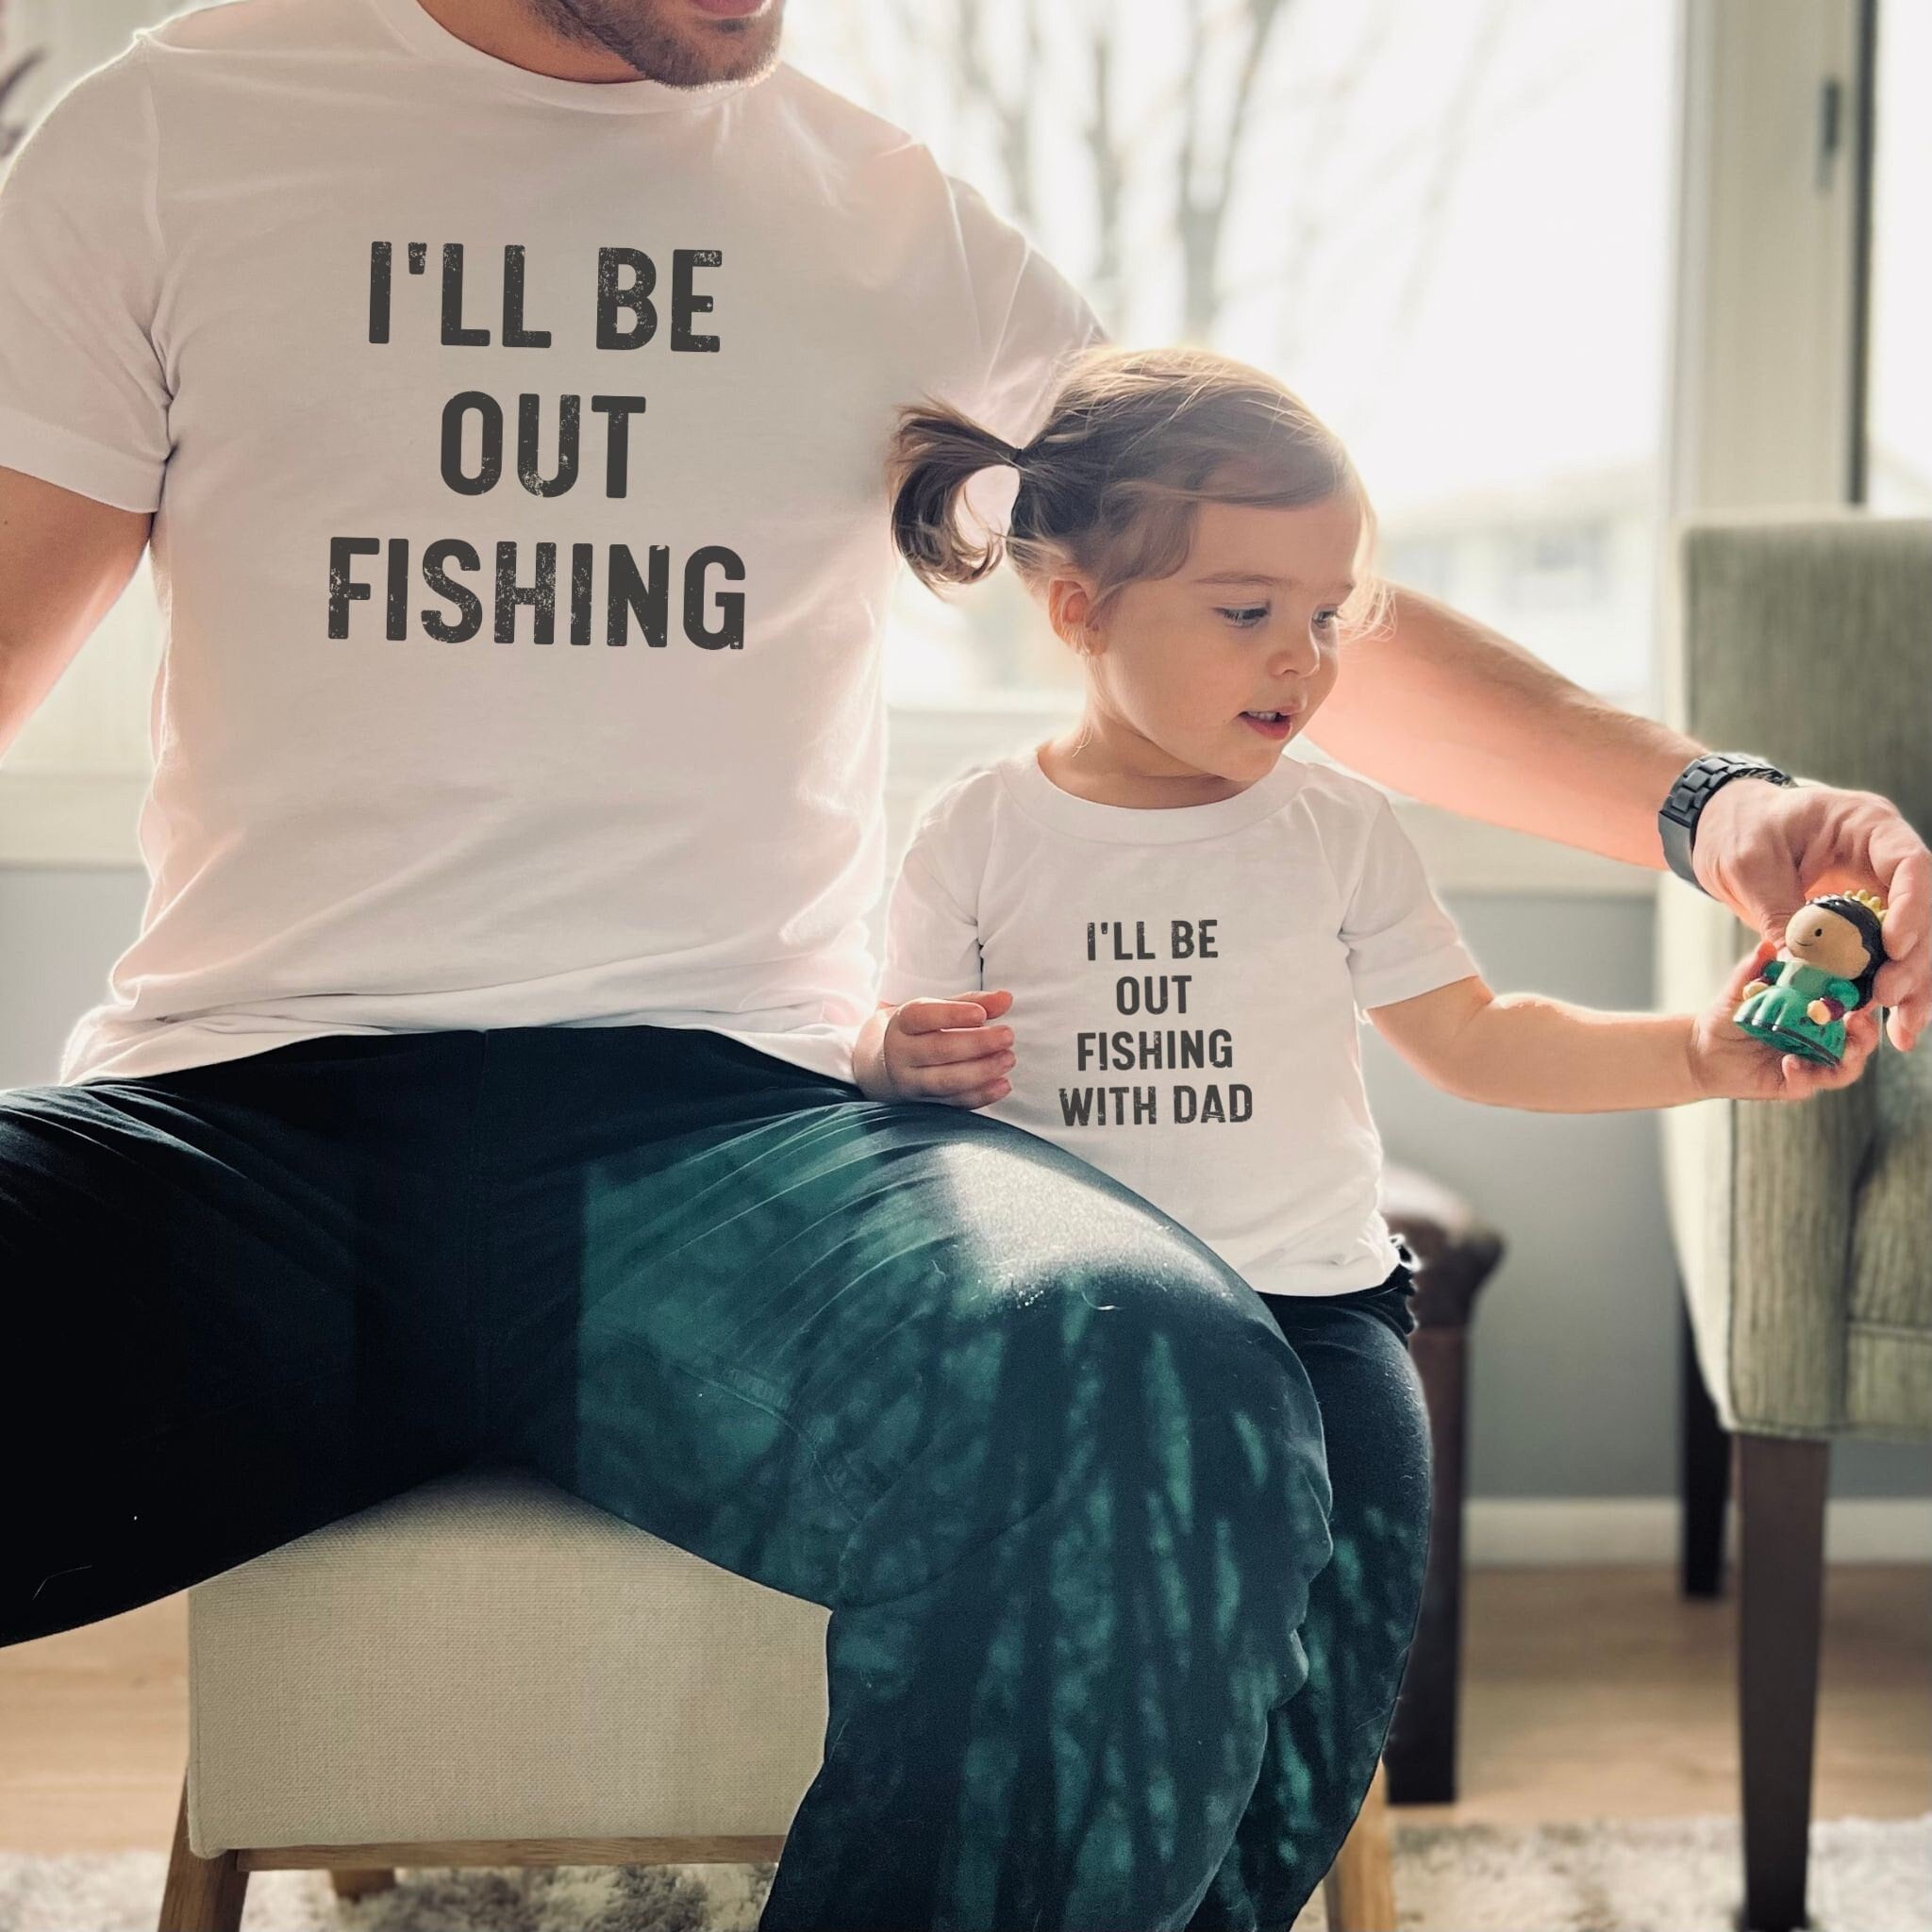  Cute Rascals Father's Day Dad and Baby Matching Outfits Clothes  Fishing Legend Fishing Rod Fish - Buddy Hook Cotton Dad Medium Baby 12  Months A White: Clothing, Shoes & Jewelry